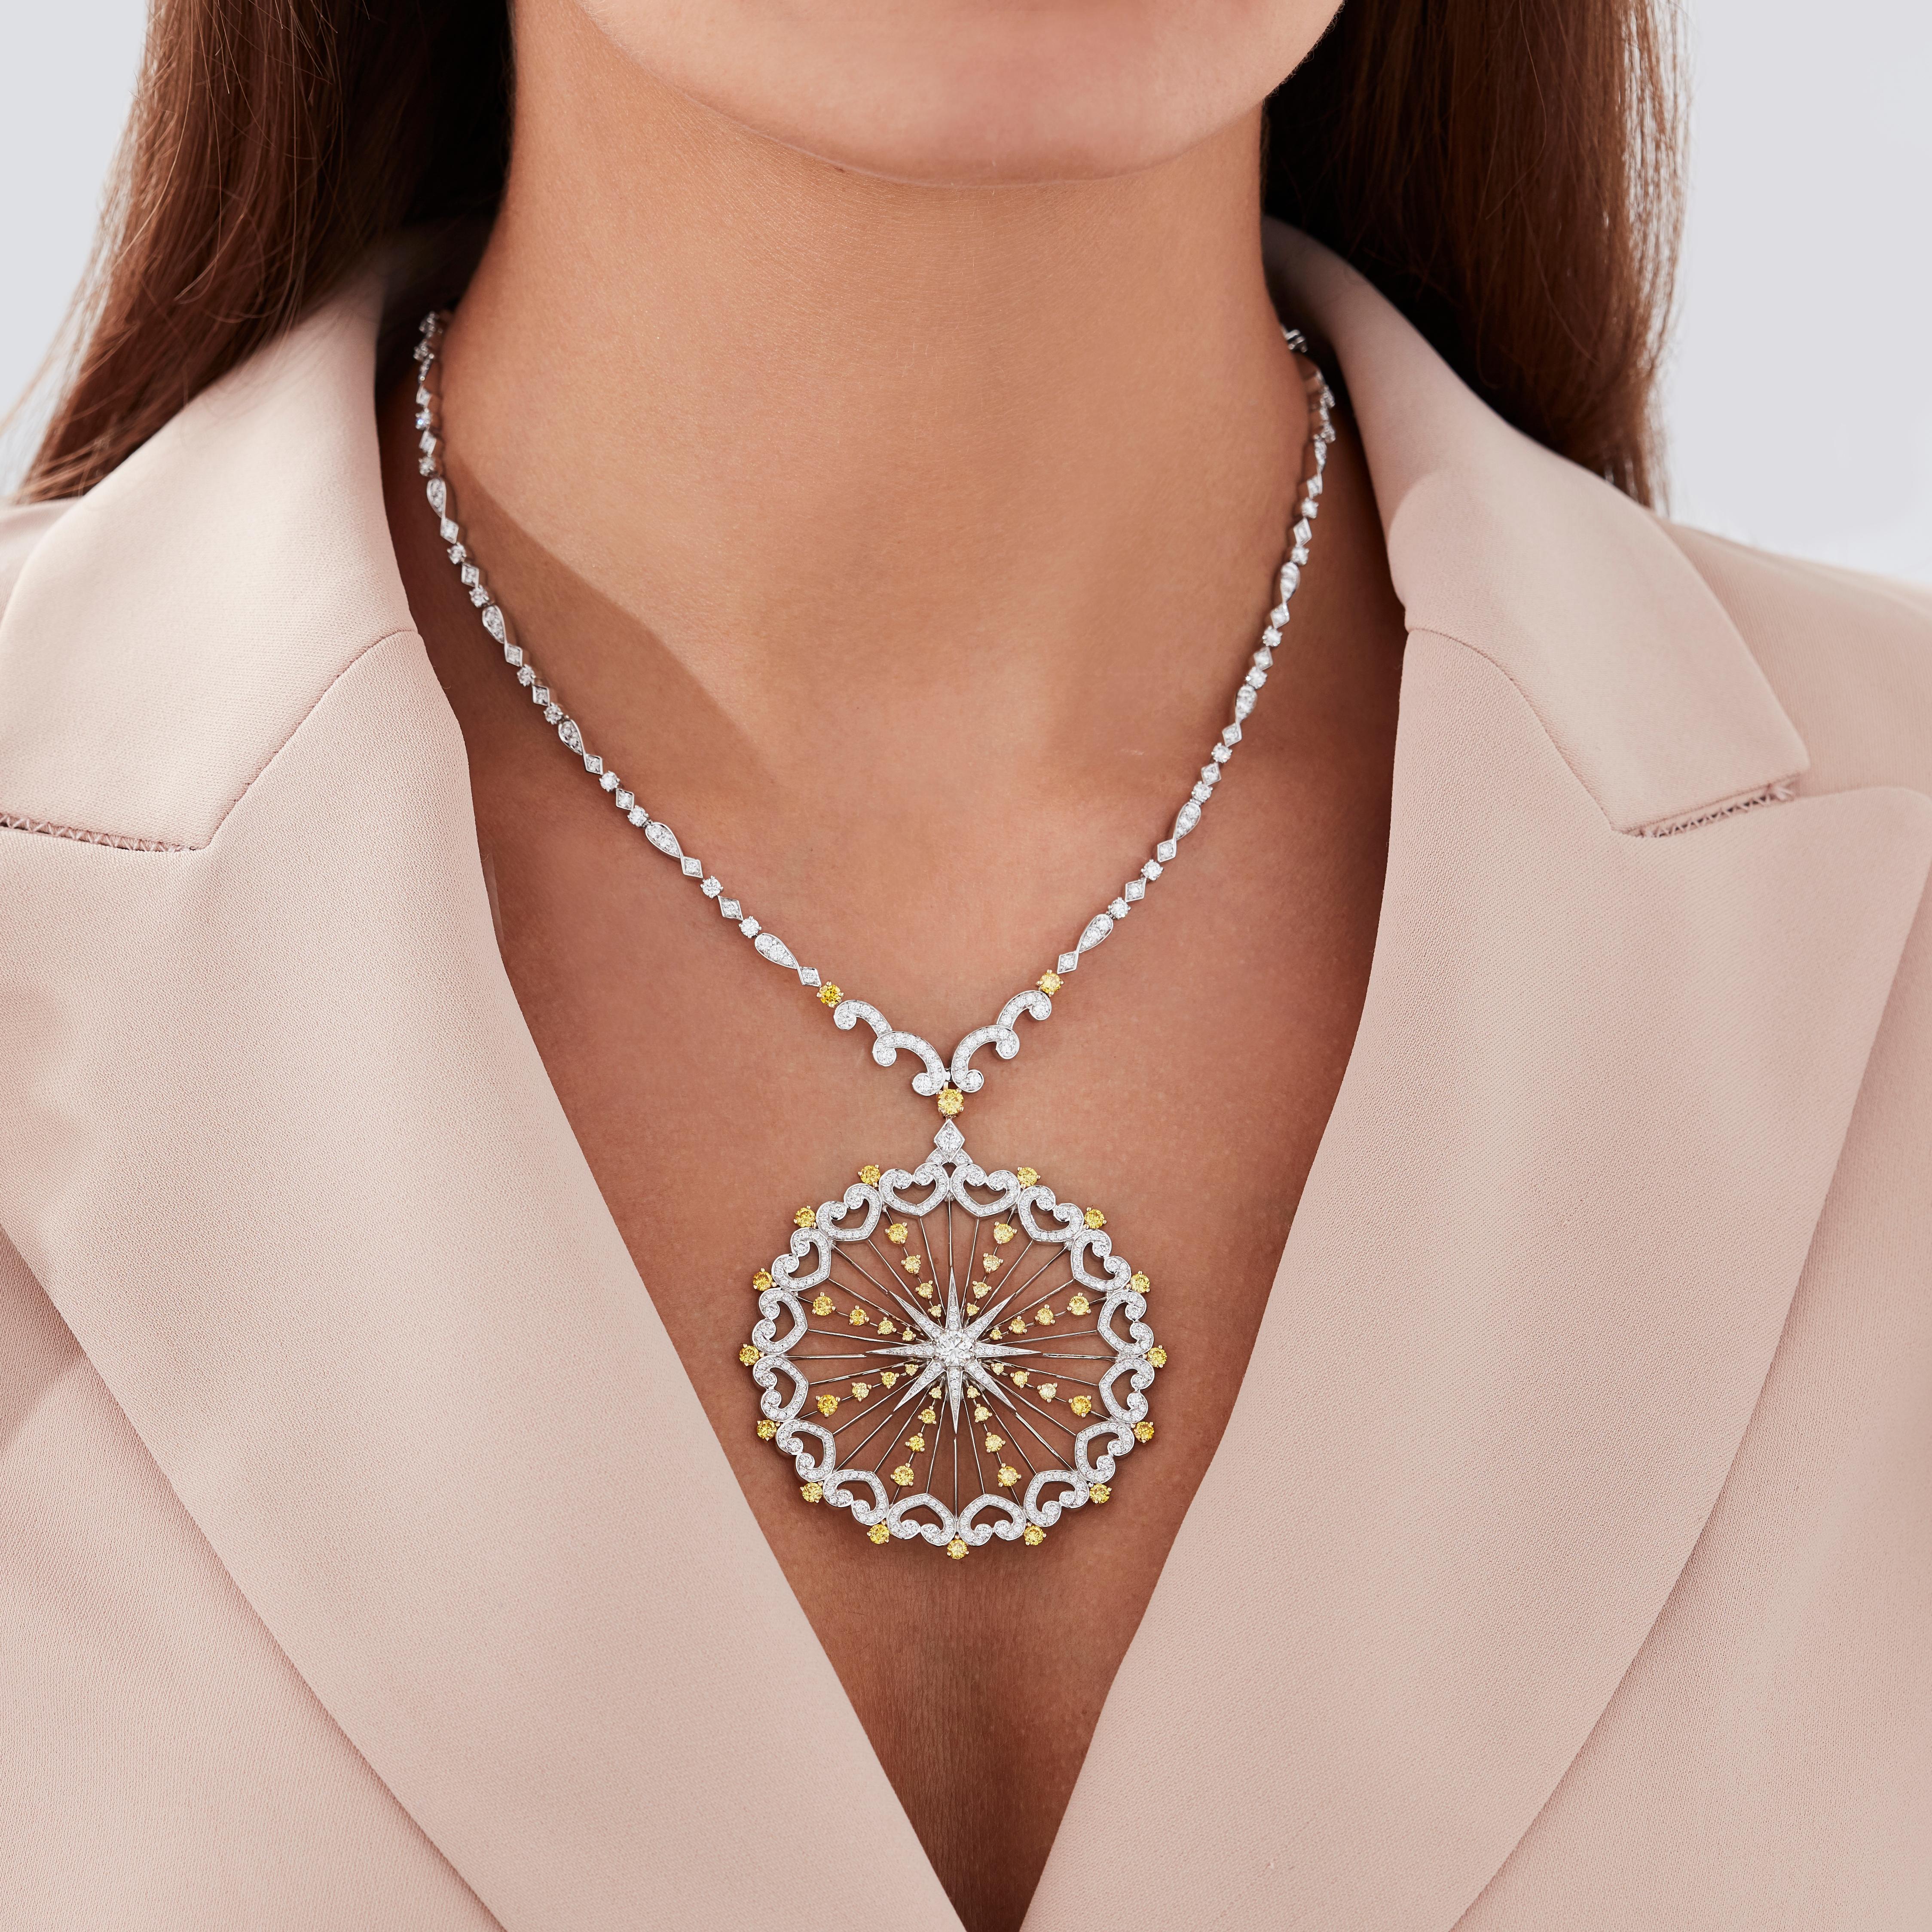 A House of Garrard 18 karat white gold 'Starlight' necklace from the 'Muse' collection, set with round white diamonds and round yellow diamonds. 

461 round white diamonds weighing: 7.50cts
50 round yellow diamonds weighing: 2.73cts
Total diamond